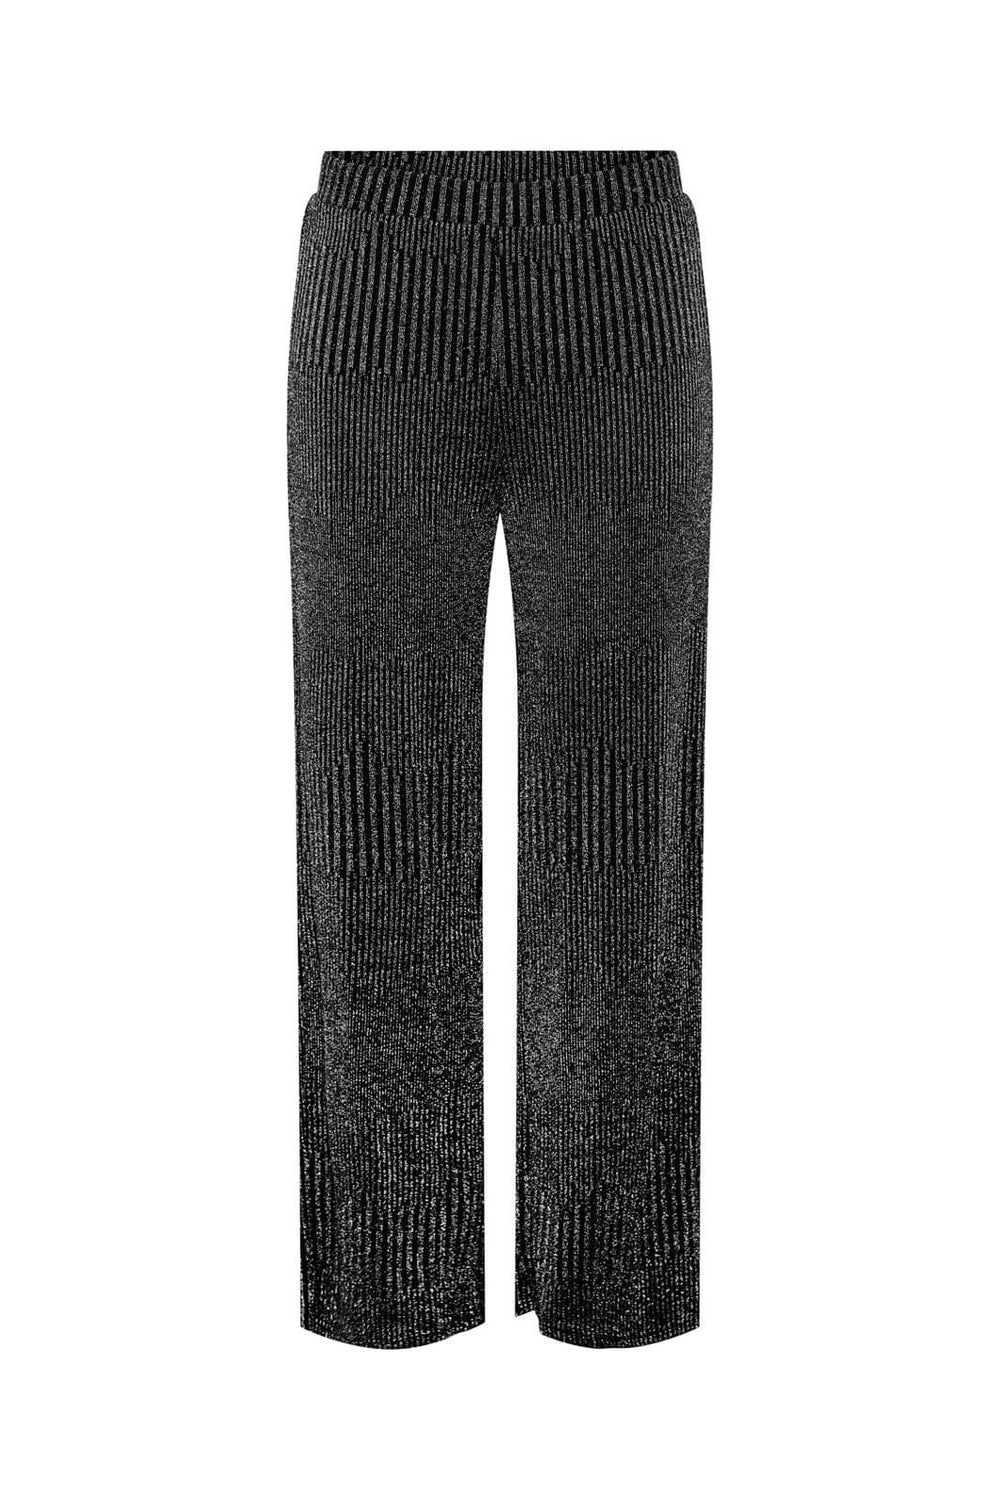 Pieces, Pcmary Hw Wide Pant, Black Silver lurex